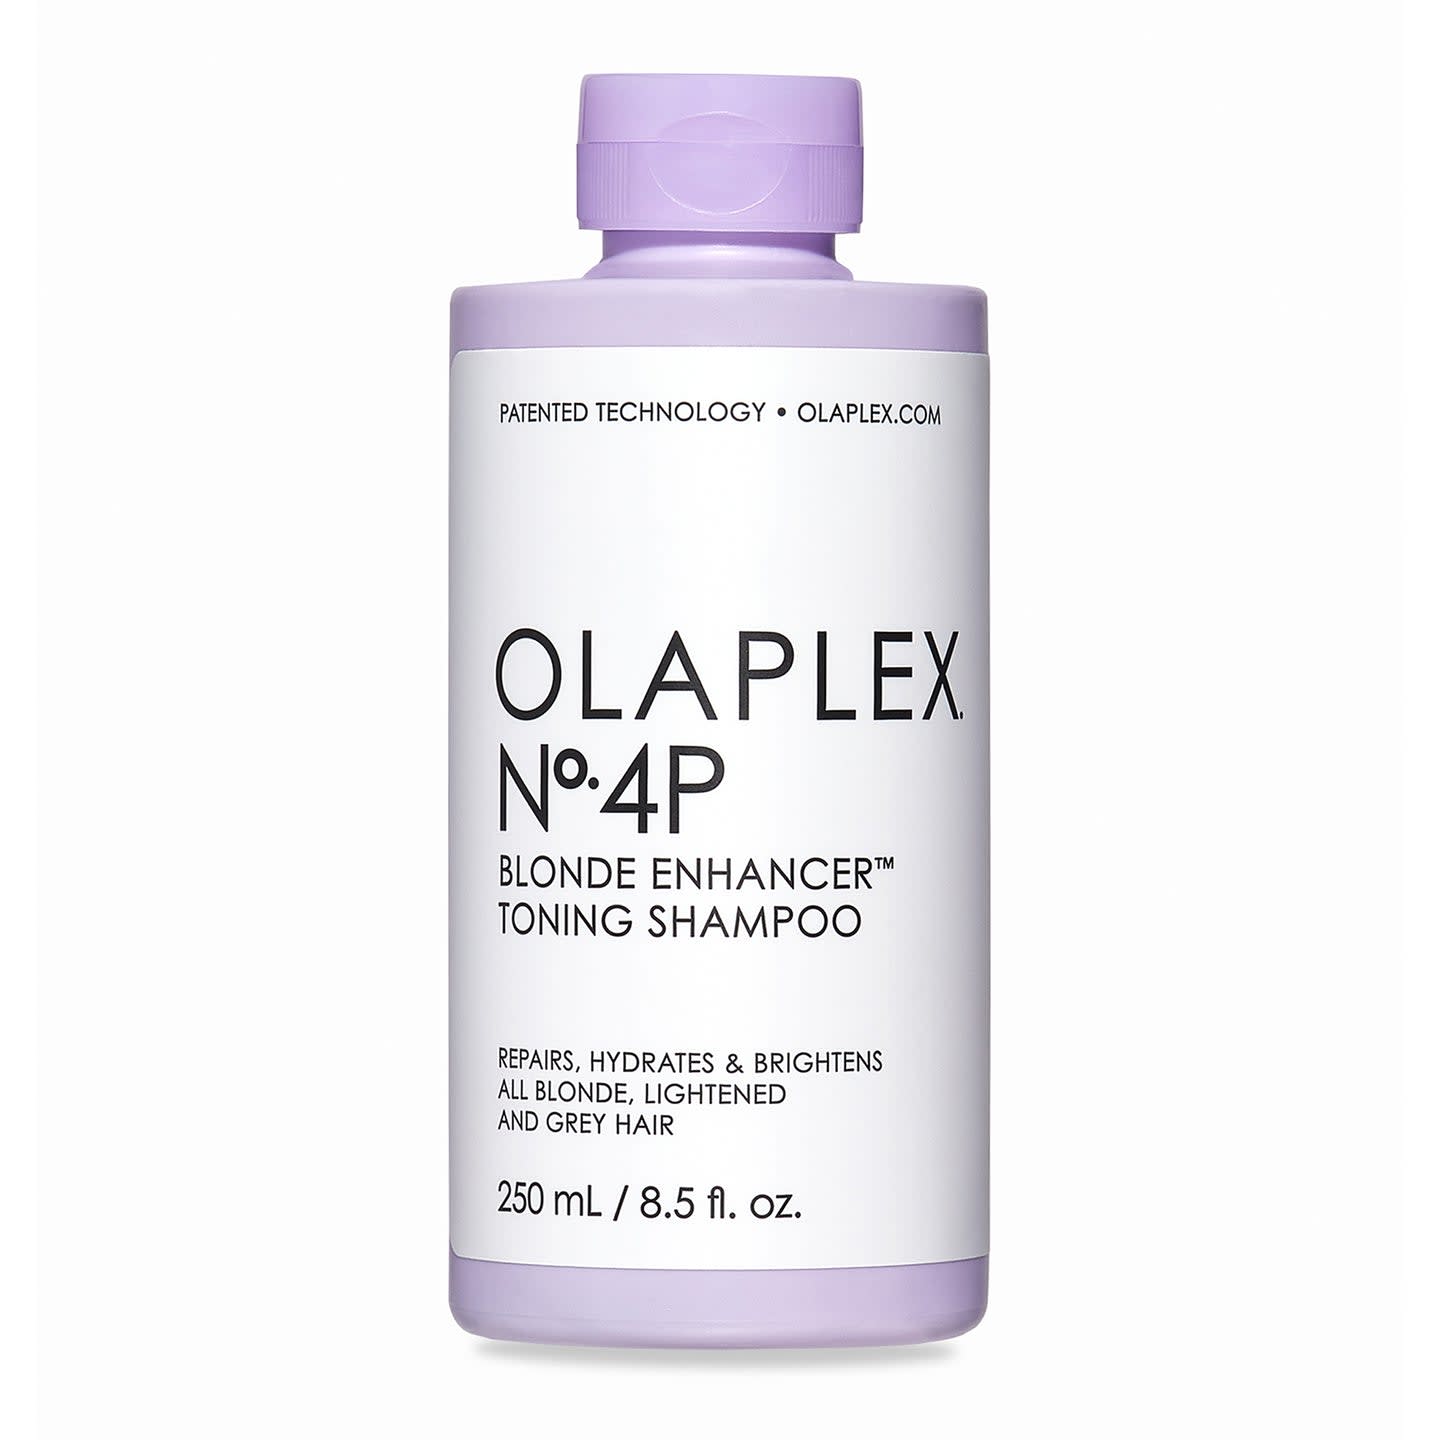 jern Overleve marmor 10 best purple shampoos of 2023 for blonde, gray and cool-toned hair